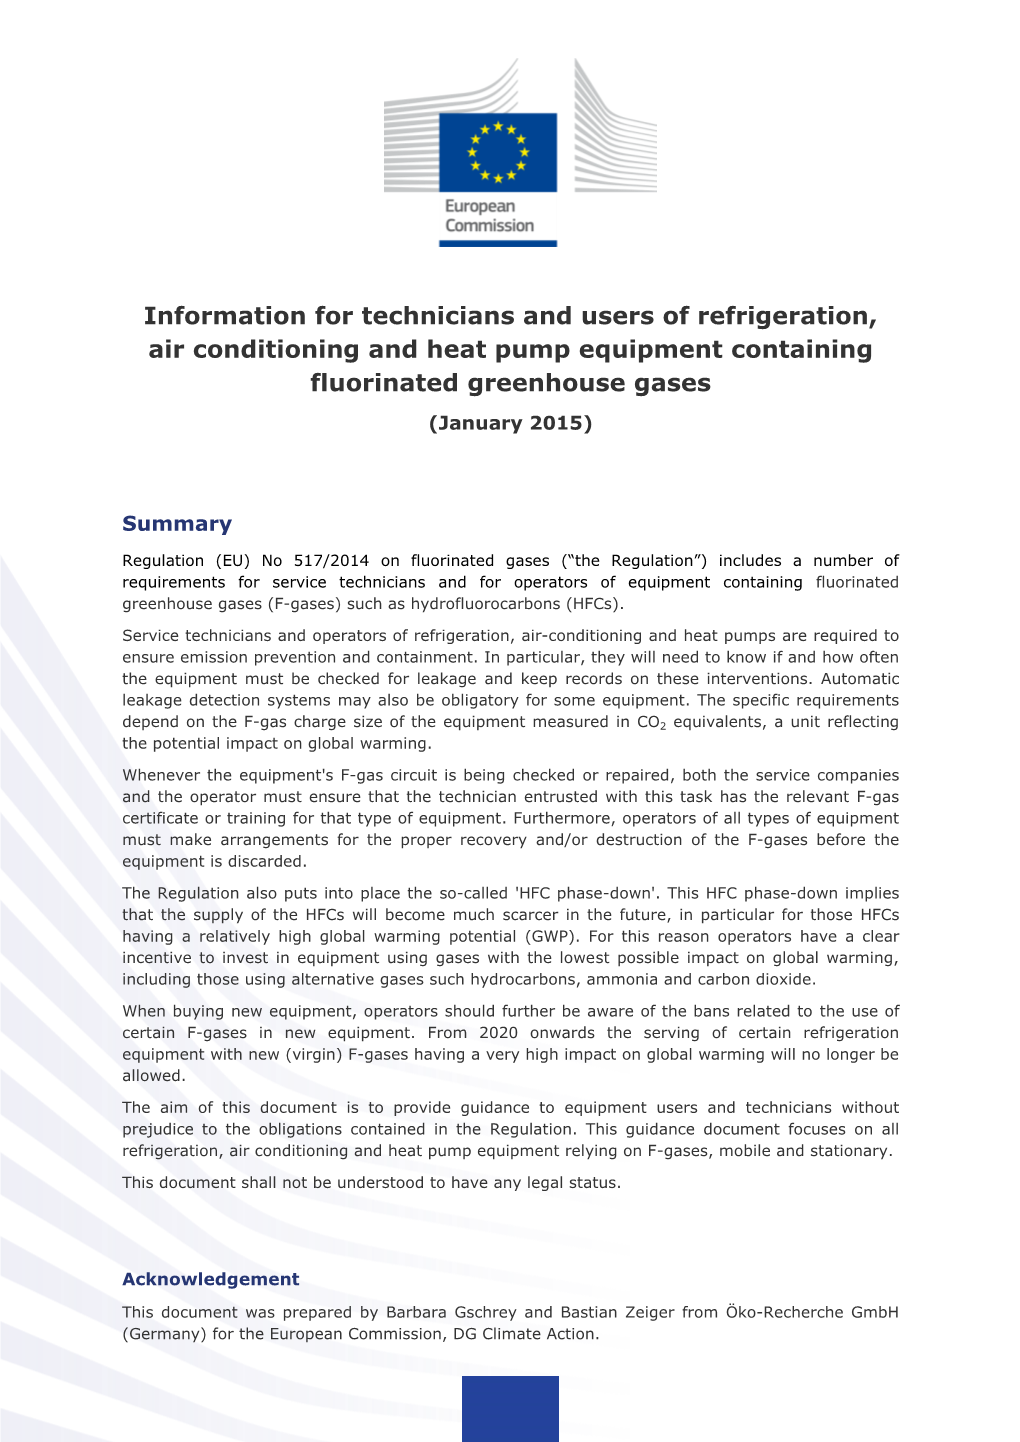 Information for Technicians and Users of Refrigeration, Air Conditioning and Heat Pump Equipment Containing Fluorinated Greenhouse Gases (January 2015)